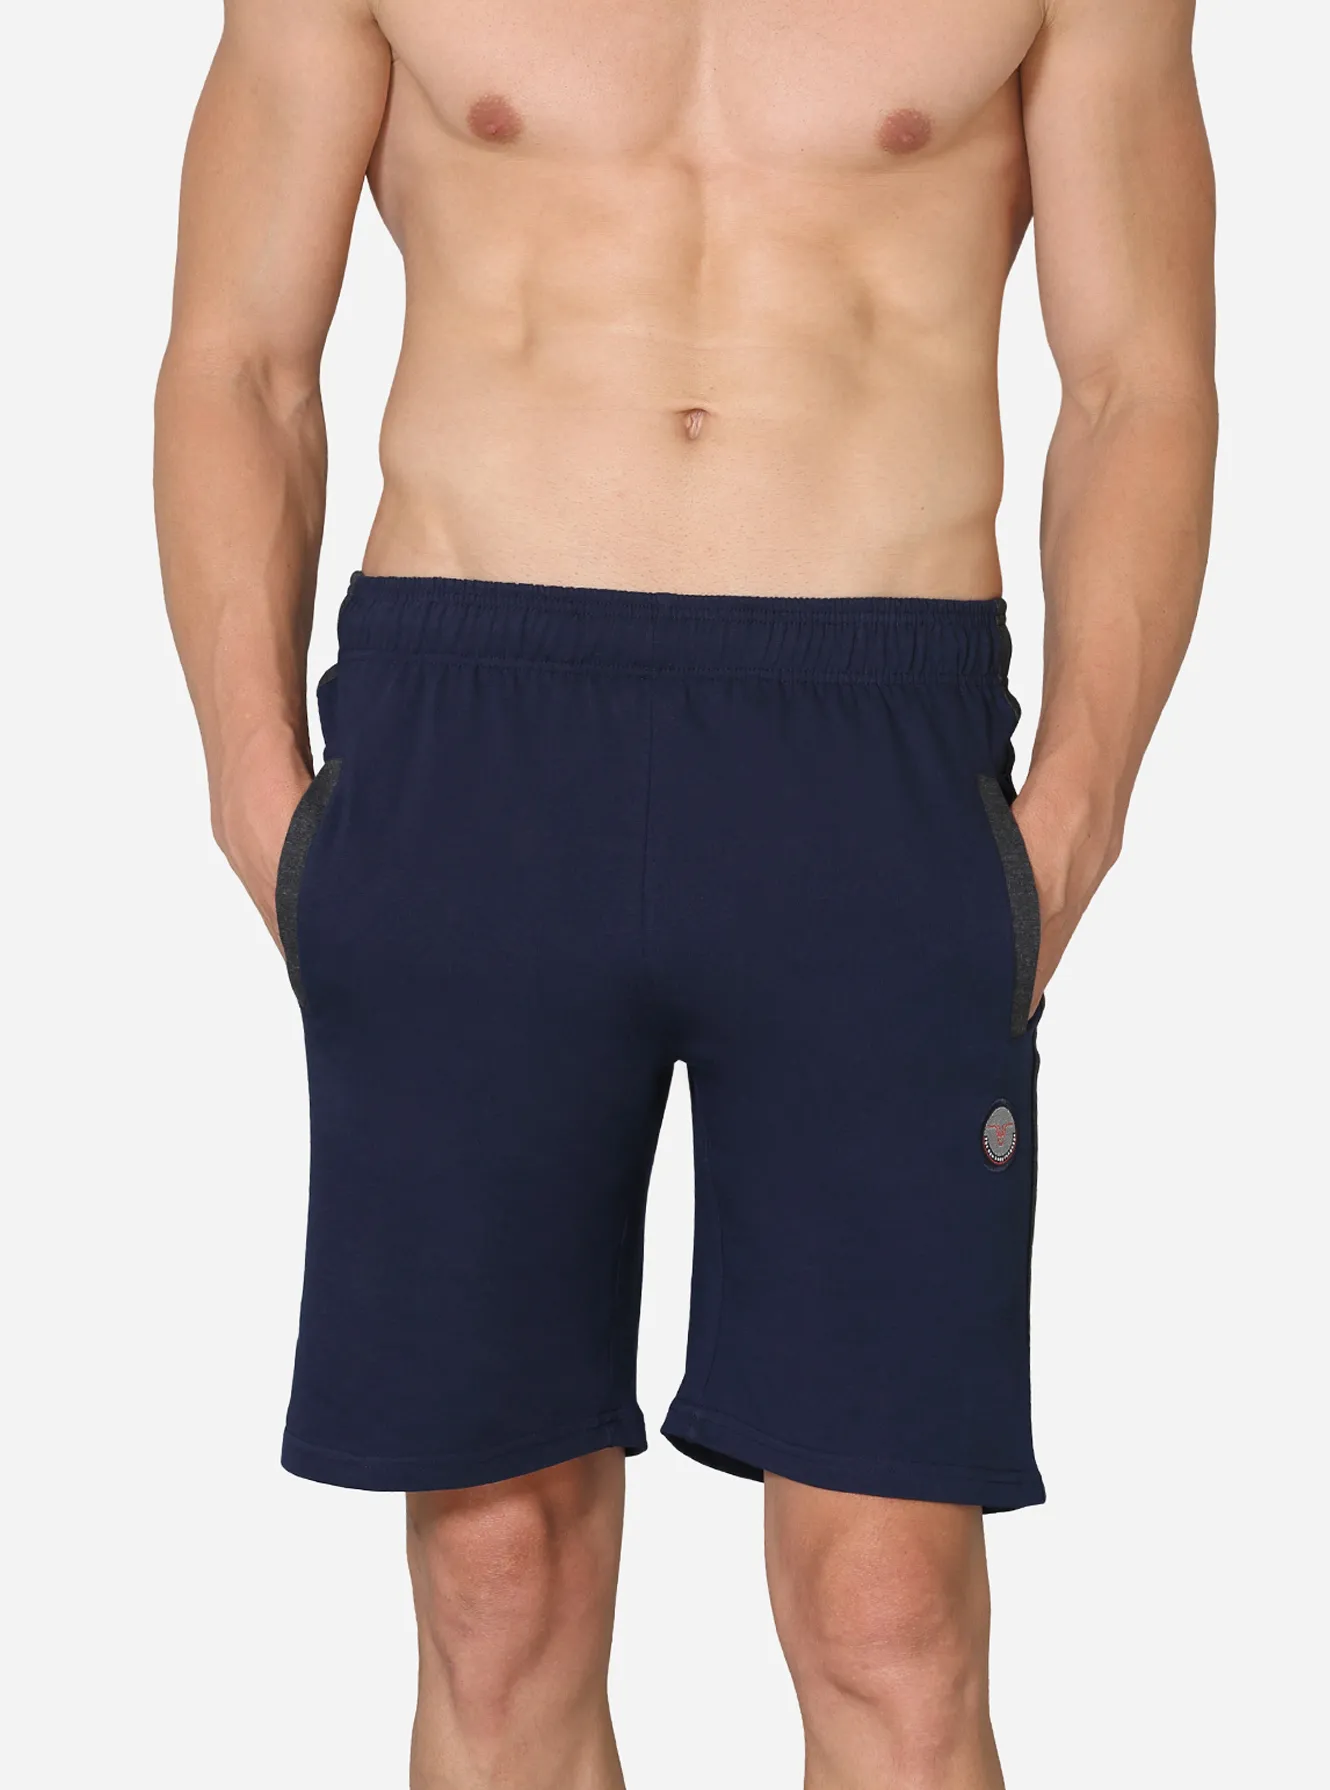 Cotton shorts with inner elastic waistband and pockets on both sides, Buy  Mens & Kids Innerwear